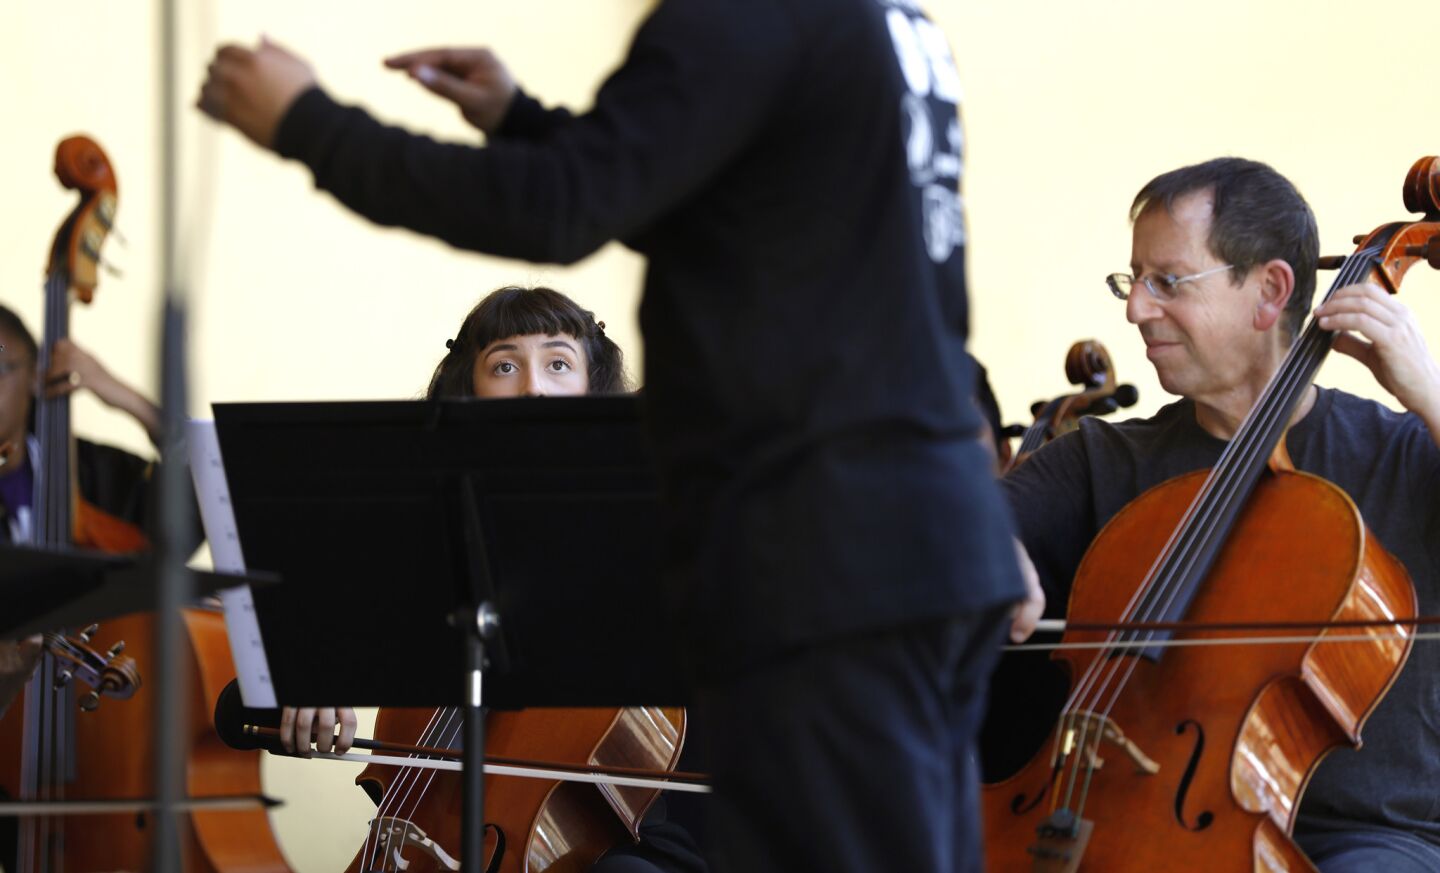 Madeleine Rubio of Youth Orchestra Los Angeles and Barry Gold, a member of the L.A. Phil, perform at MacArthur Park.